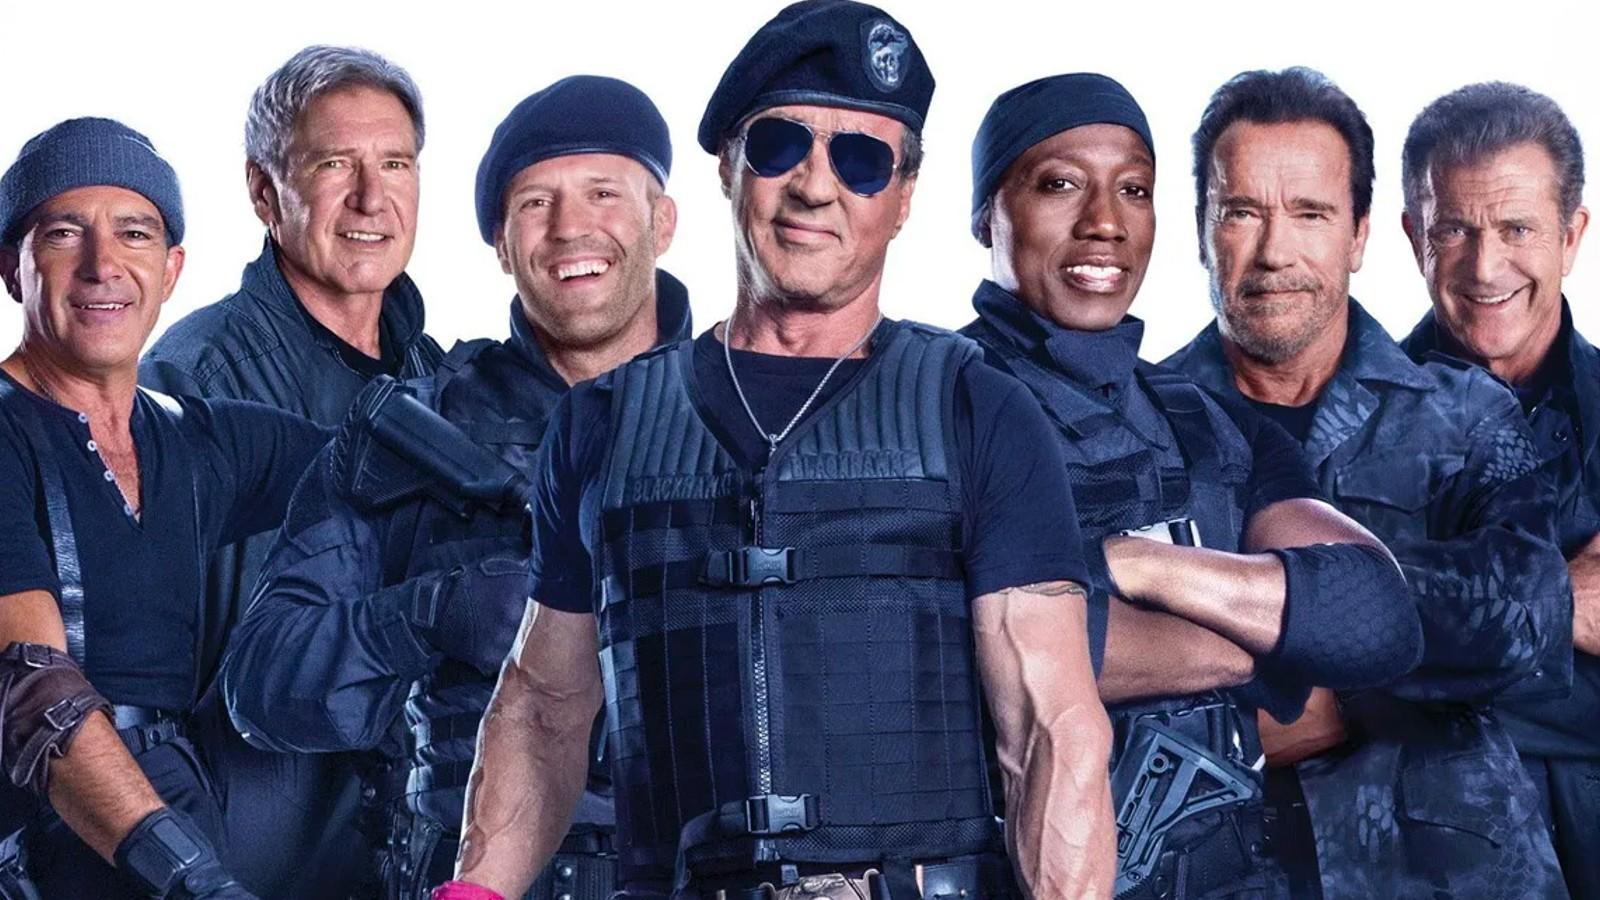 The cast of The Expendables